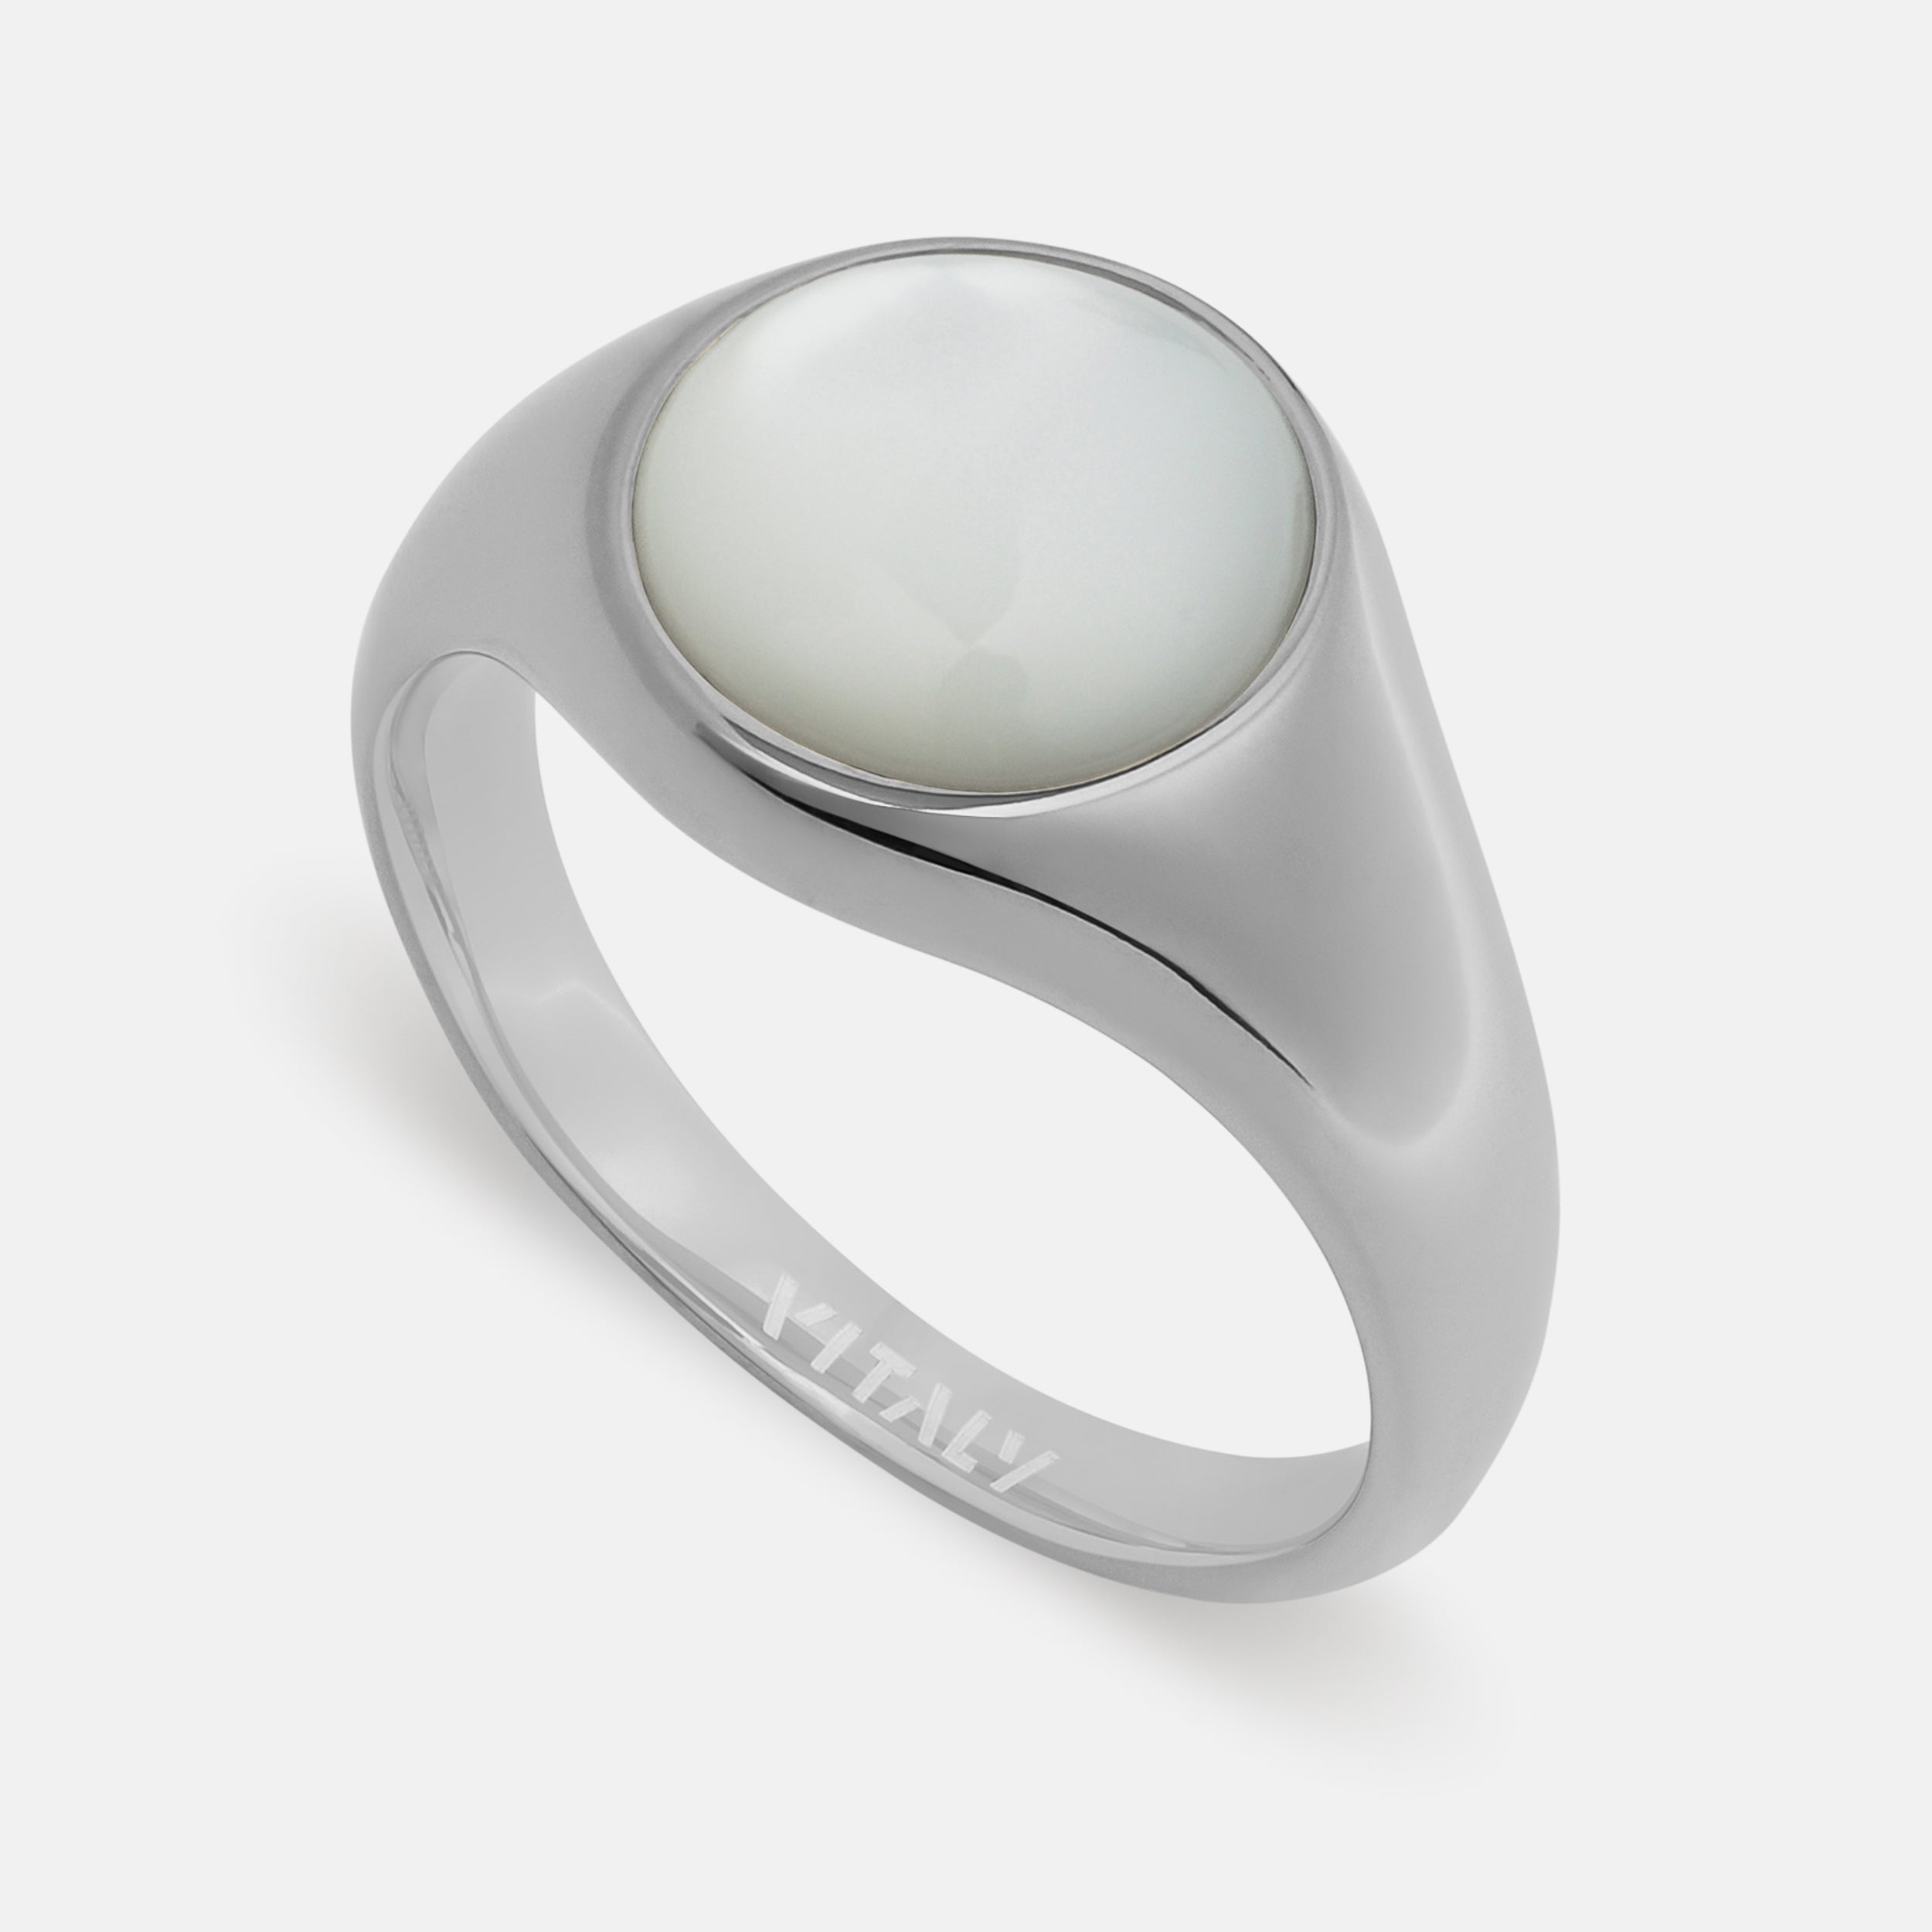 GEMORIO Pearl Moti 3.9cts or 4.25ratti Panchdhatu For Men Silver Pearl Gold  Plated Ring Price in India - Buy GEMORIO Pearl Moti 3.9cts or 4.25ratti  Panchdhatu For Men Silver Pearl Gold Plated